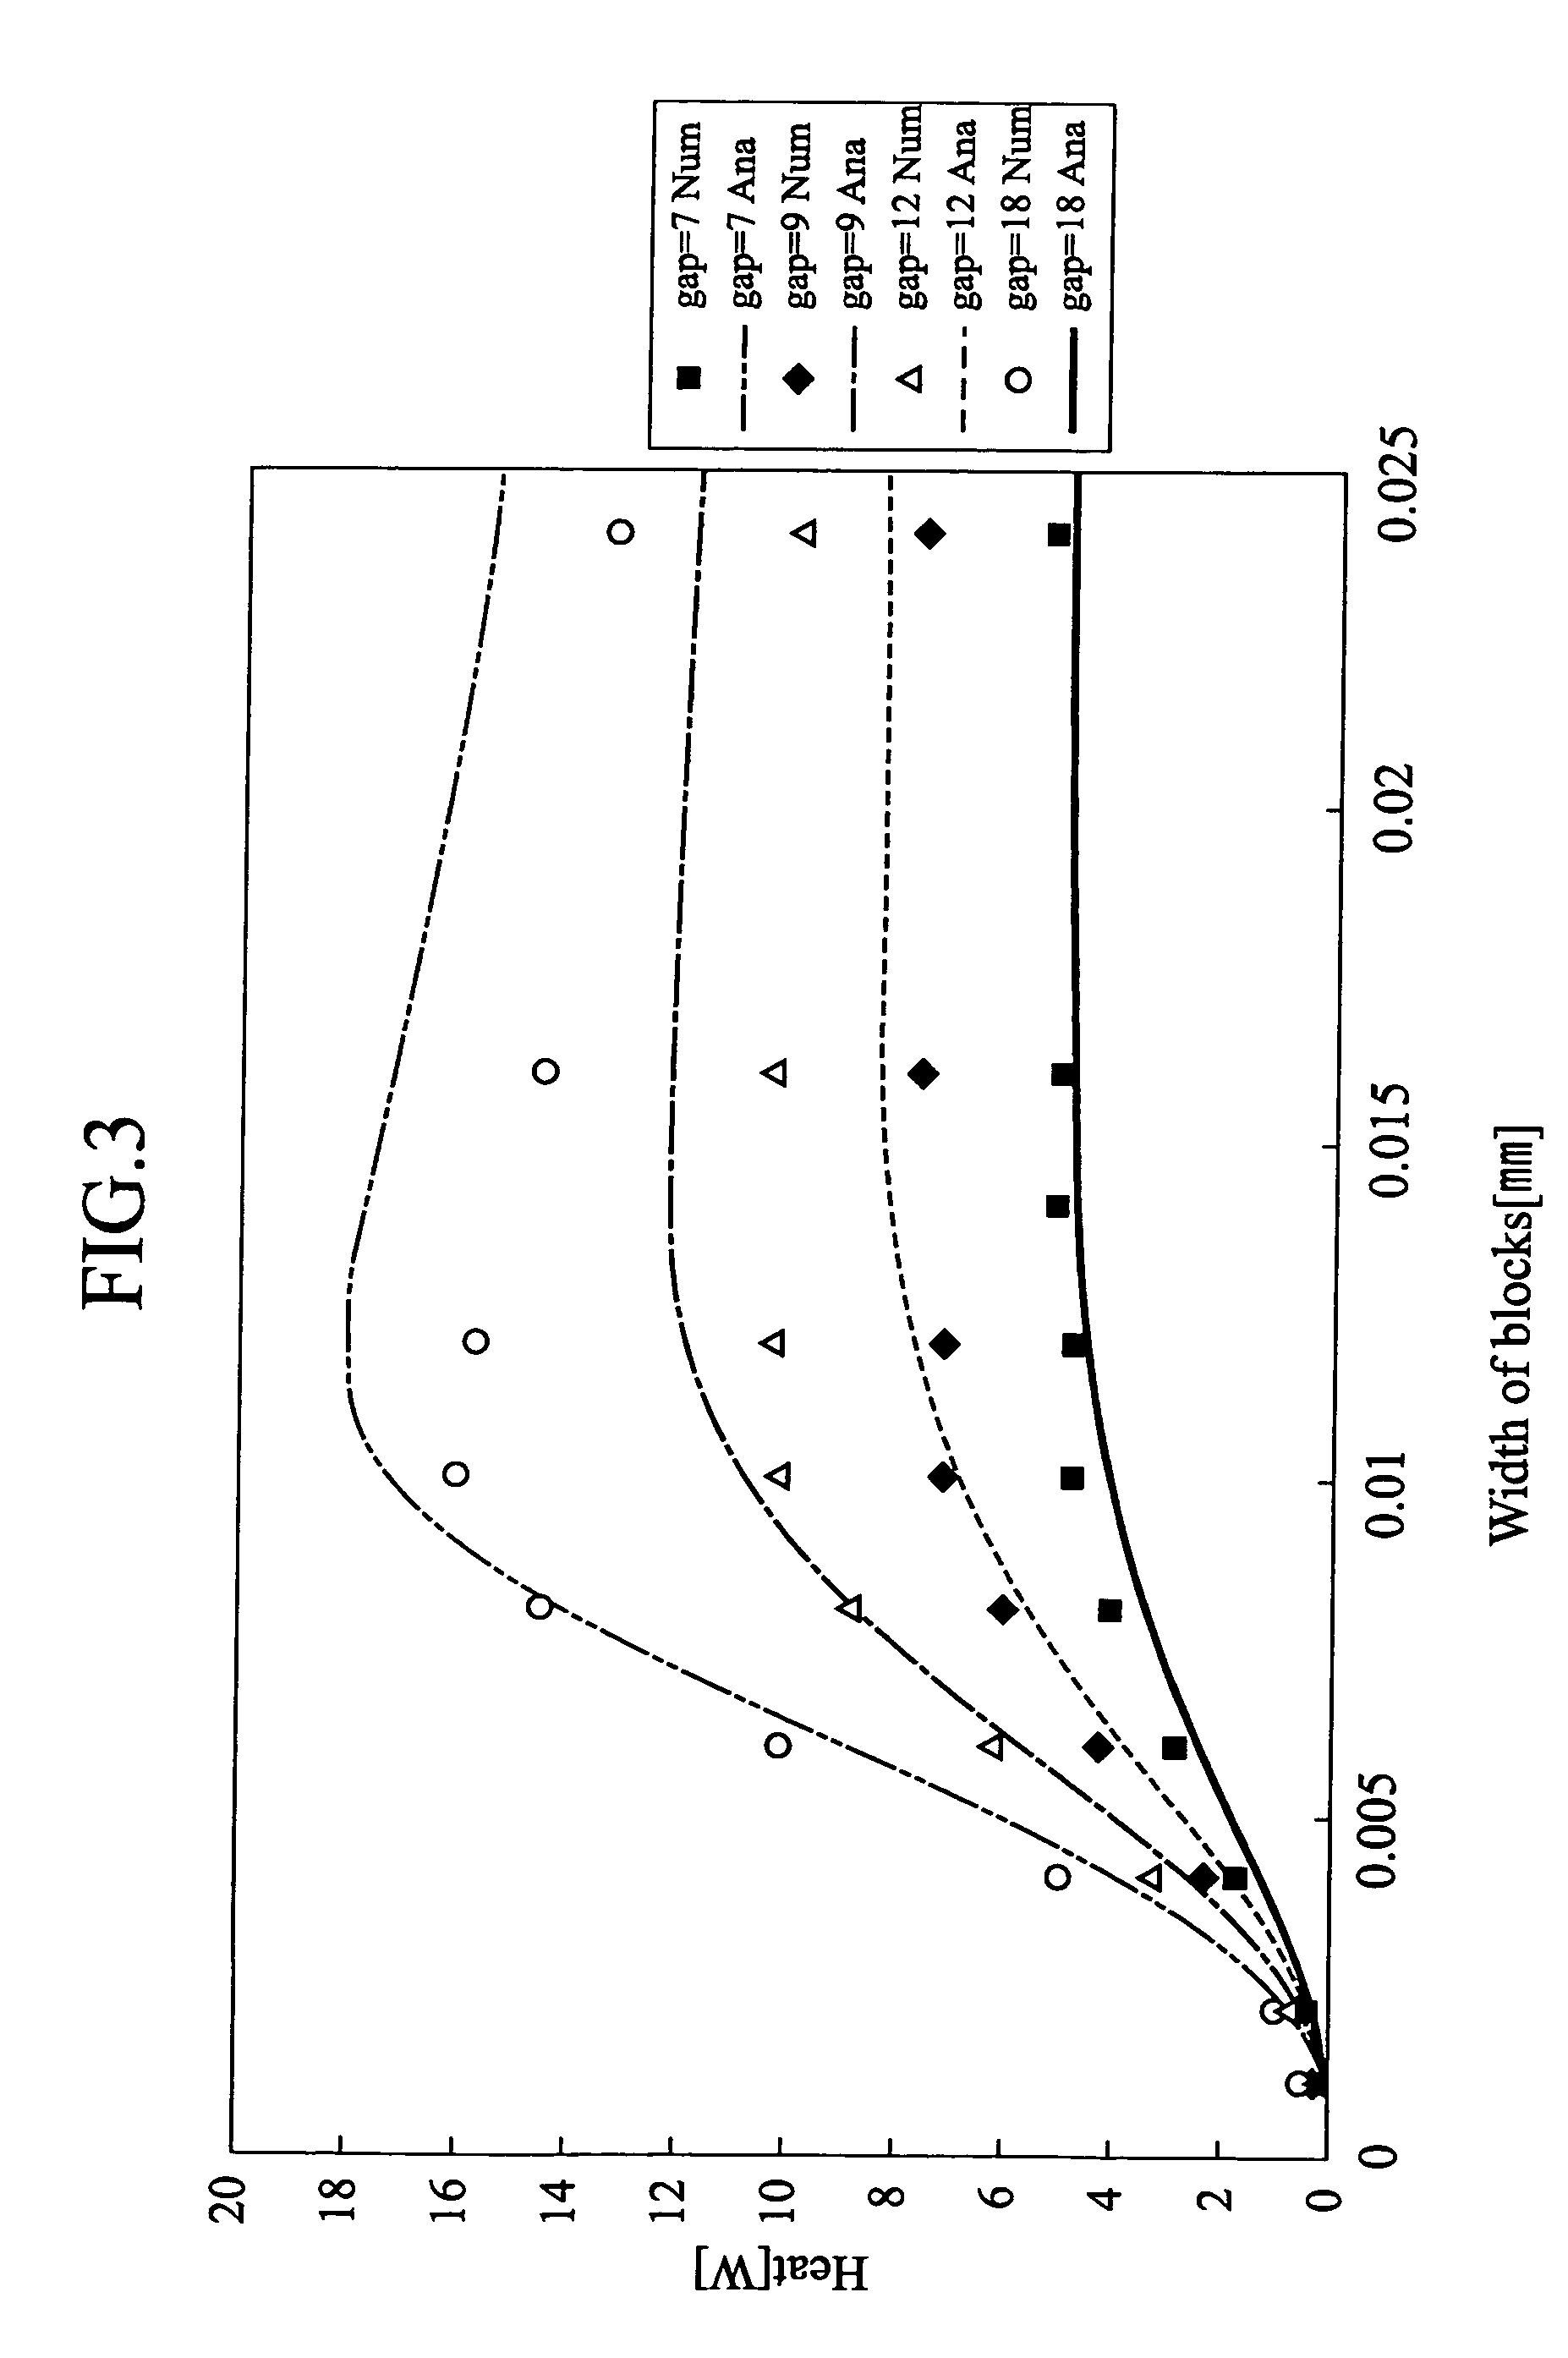 Heat dissipating structure for an electronic device